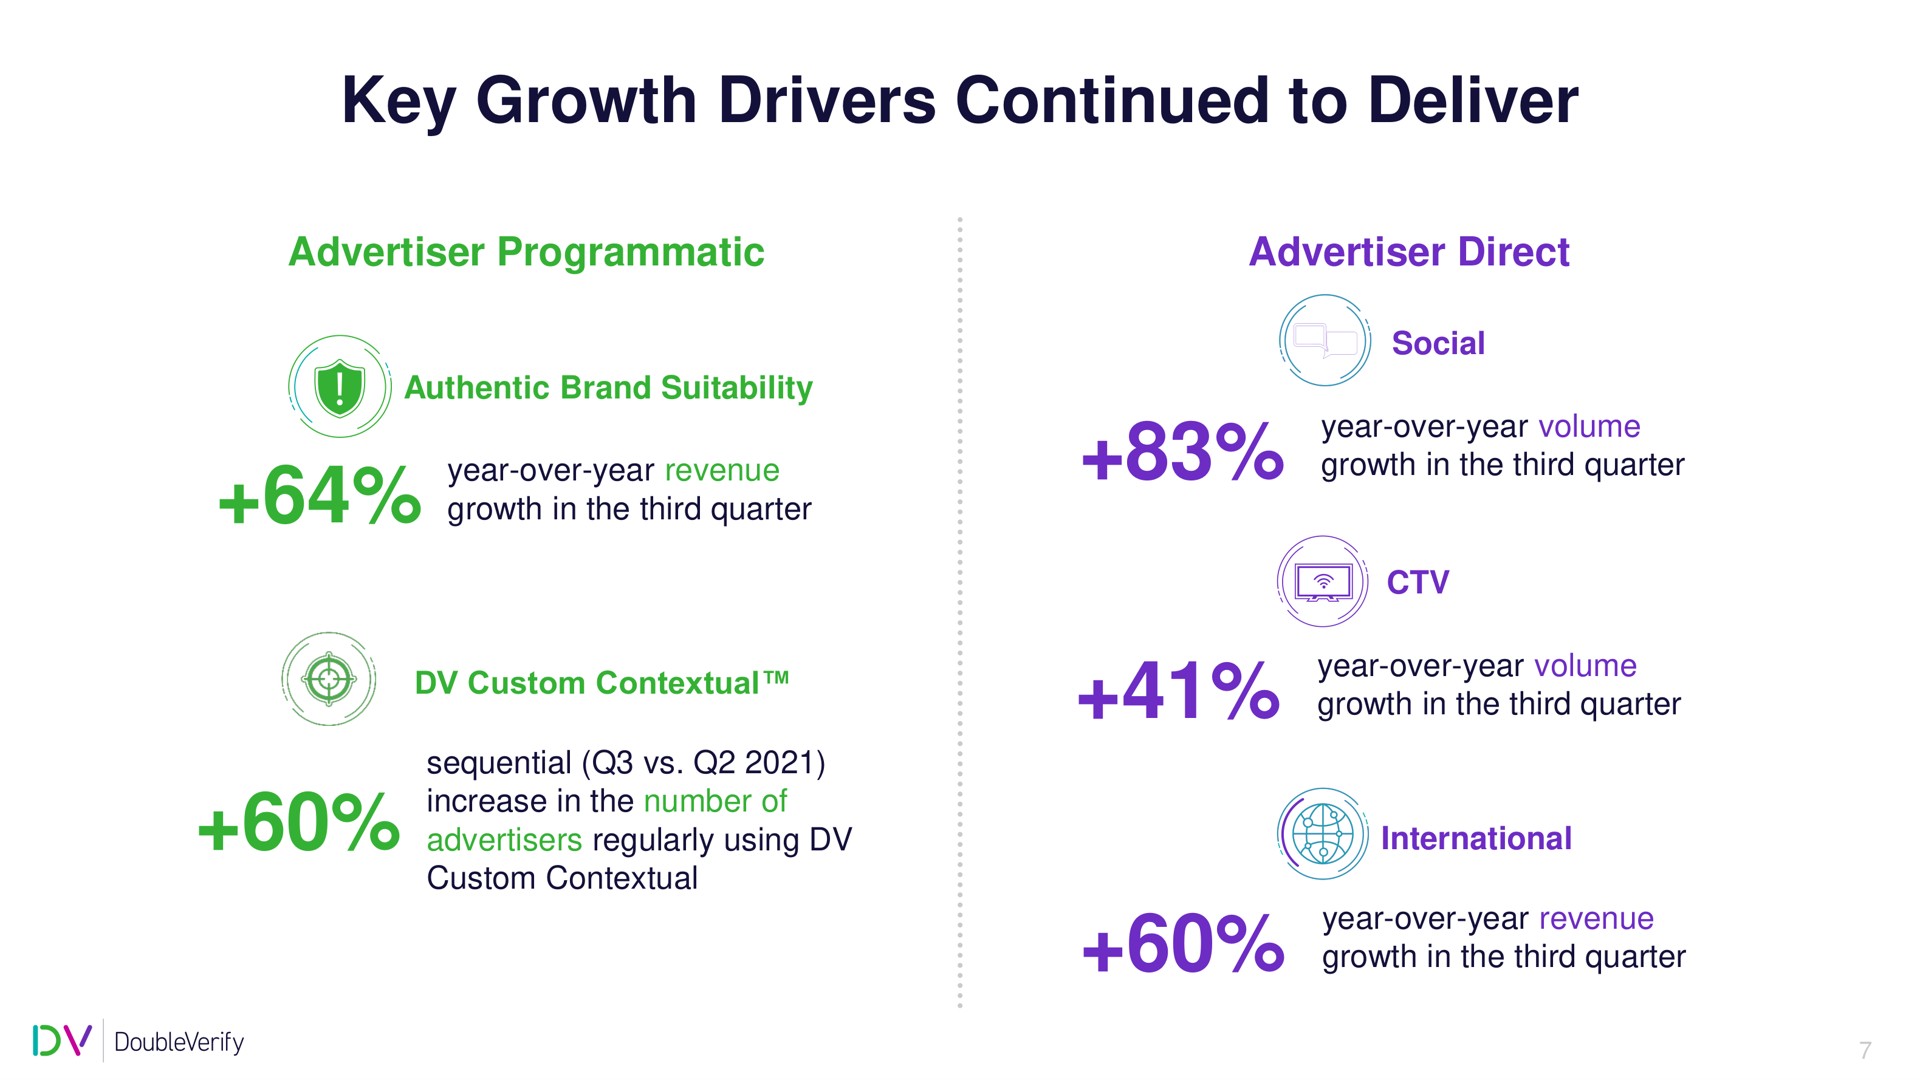 key growth drivers continued to deliver in the third quarter in the third quarter | DoubleVerify